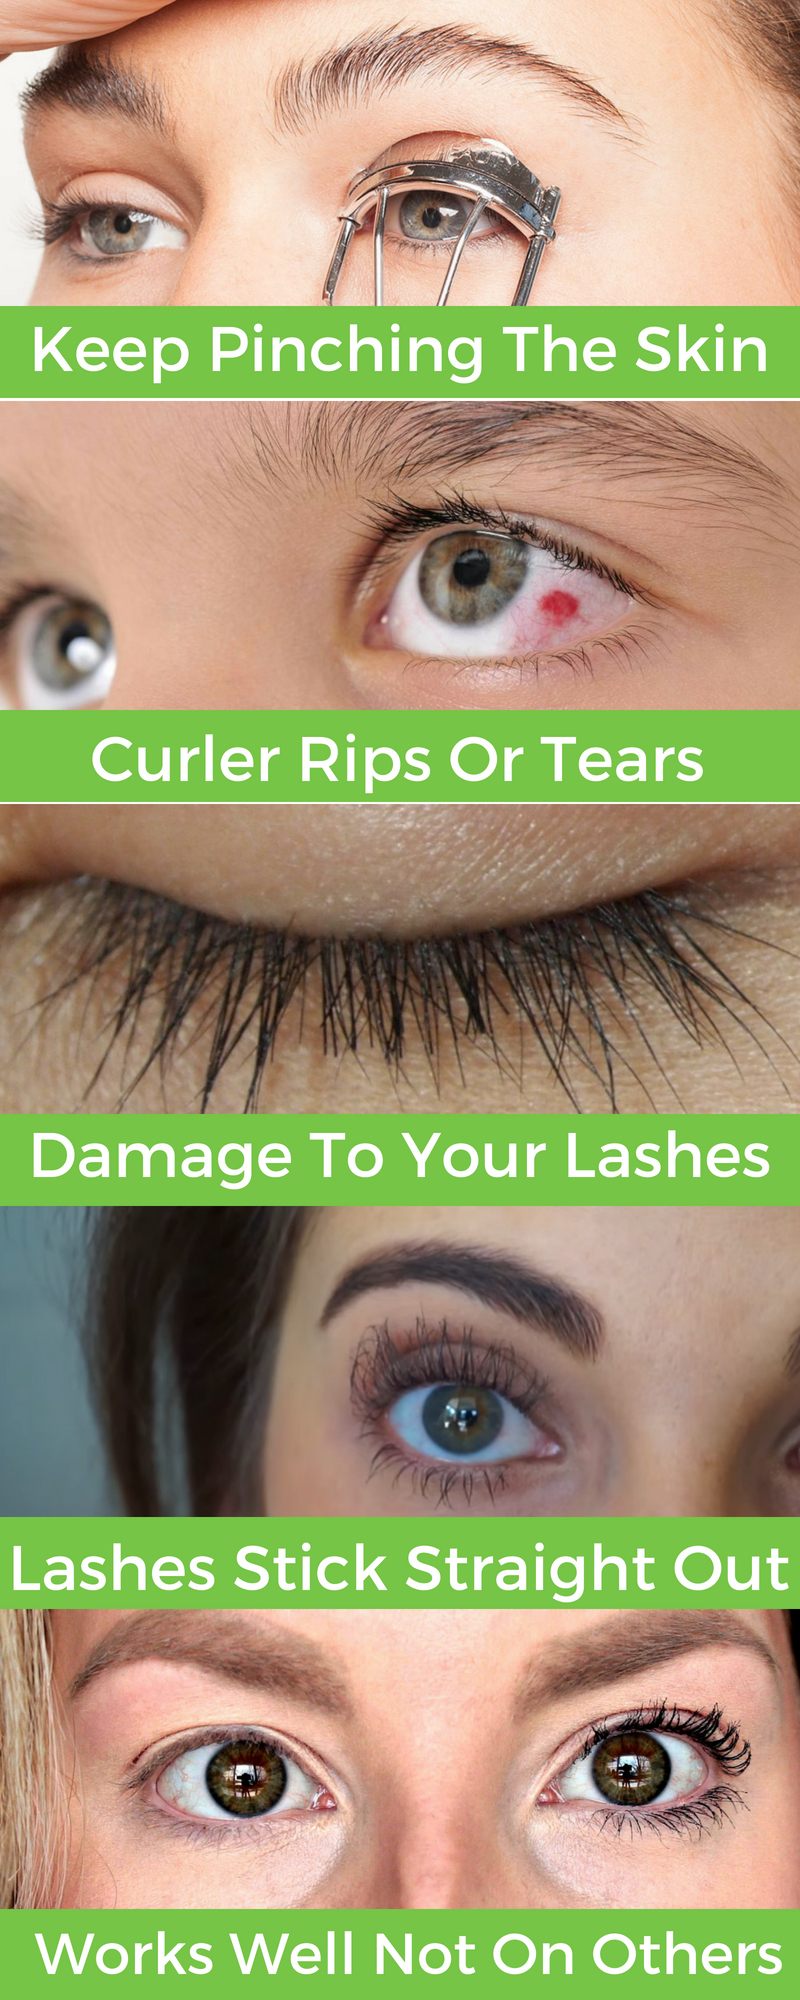 Benefits of Using an Eyelash Curler - WITH TEXT